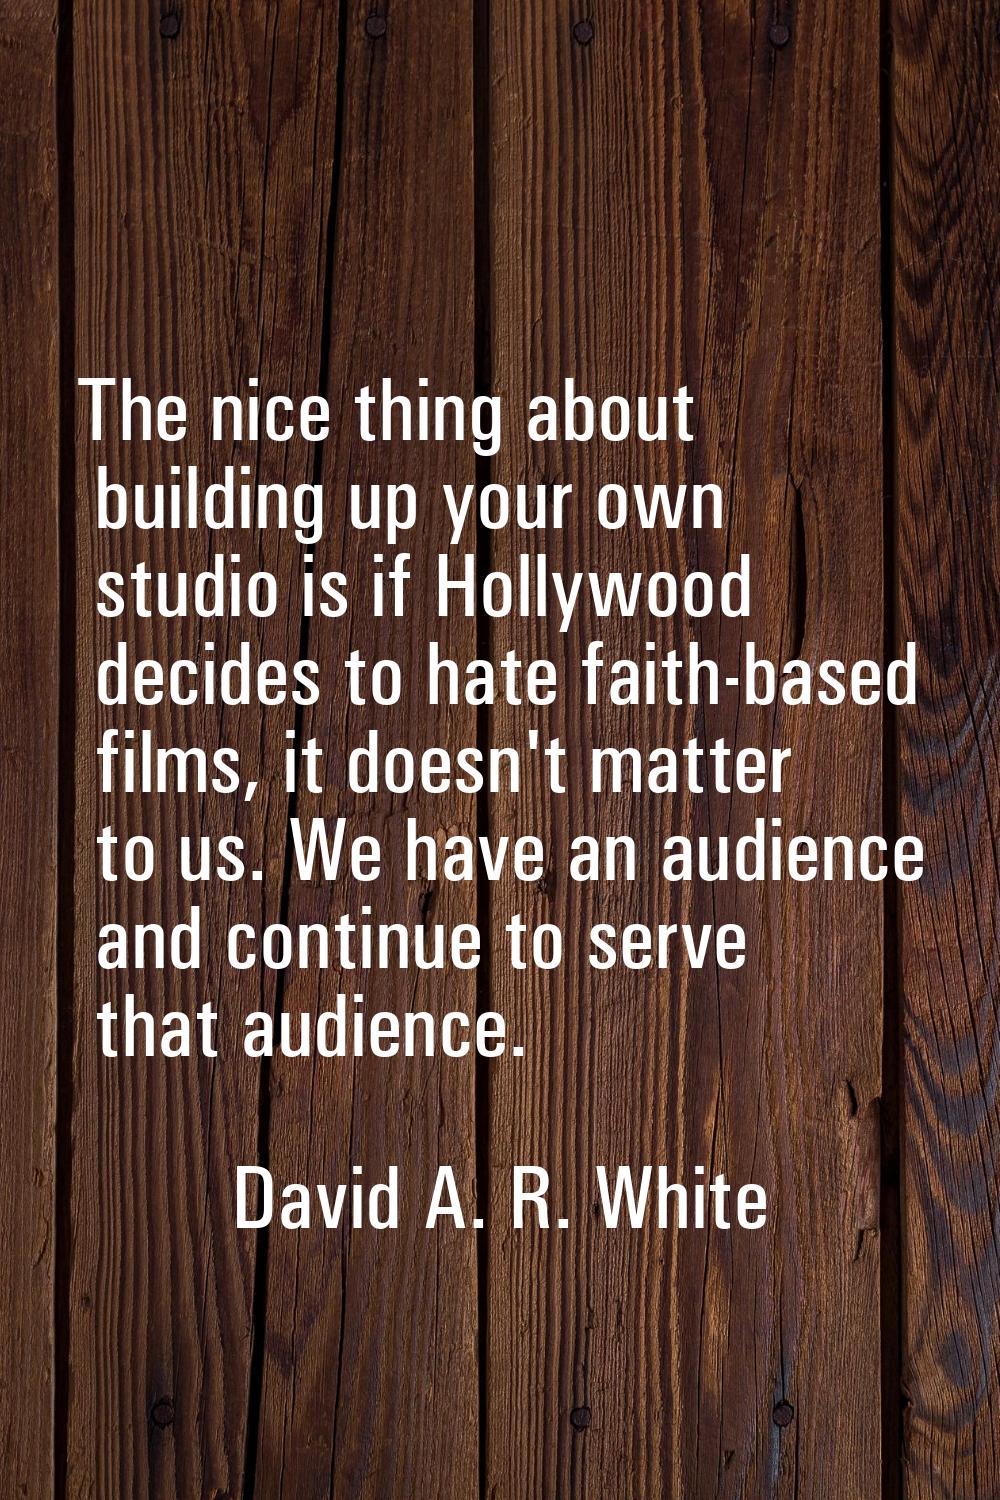 The nice thing about building up your own studio is if Hollywood decides to hate faith-based films,